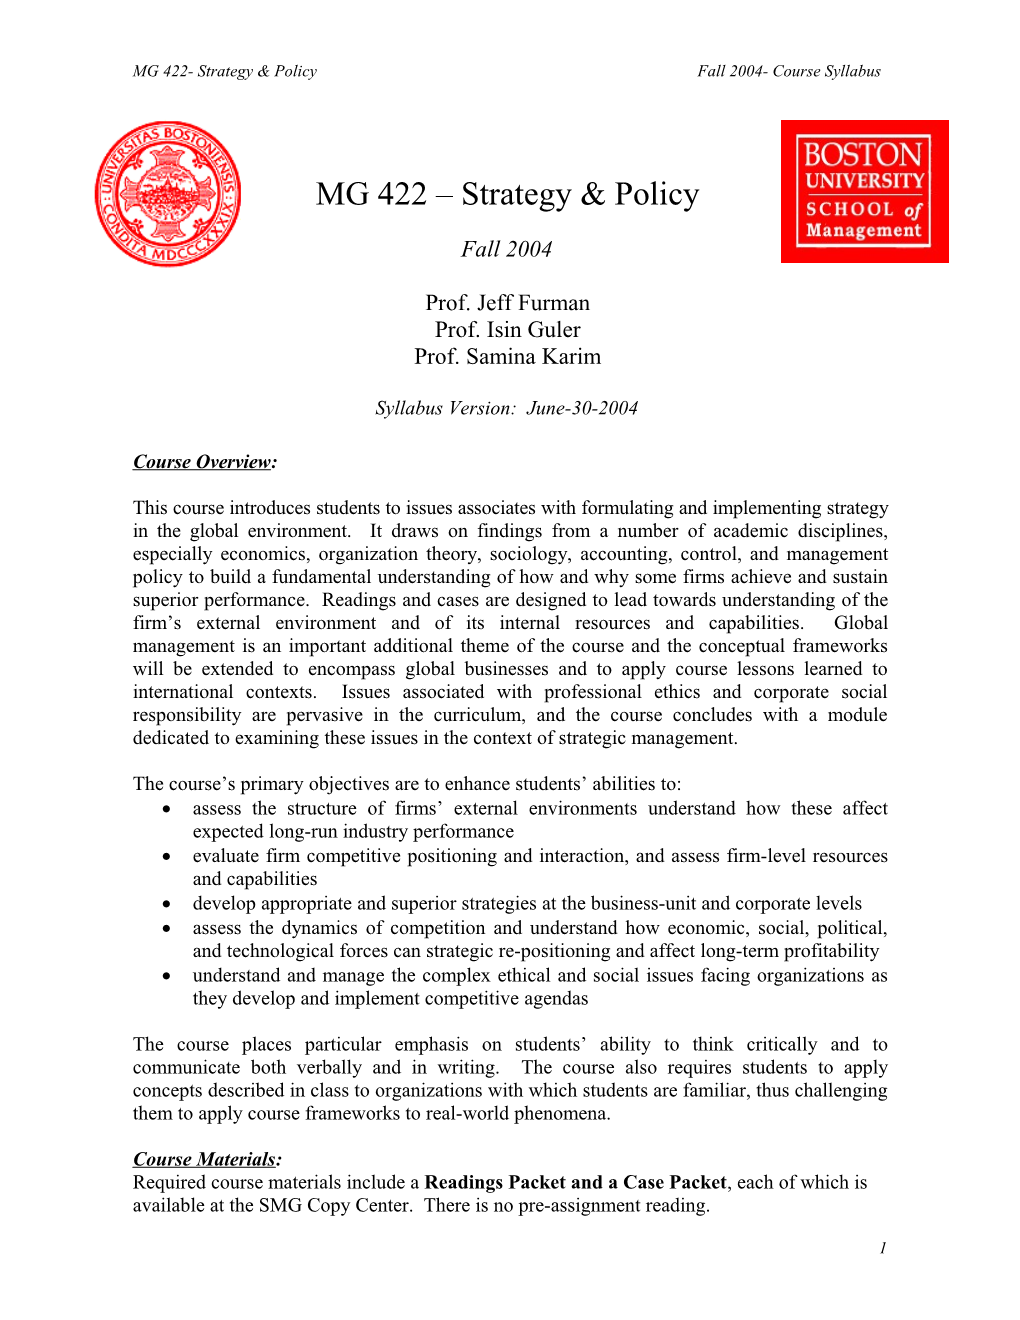 MG 422- Management Policy